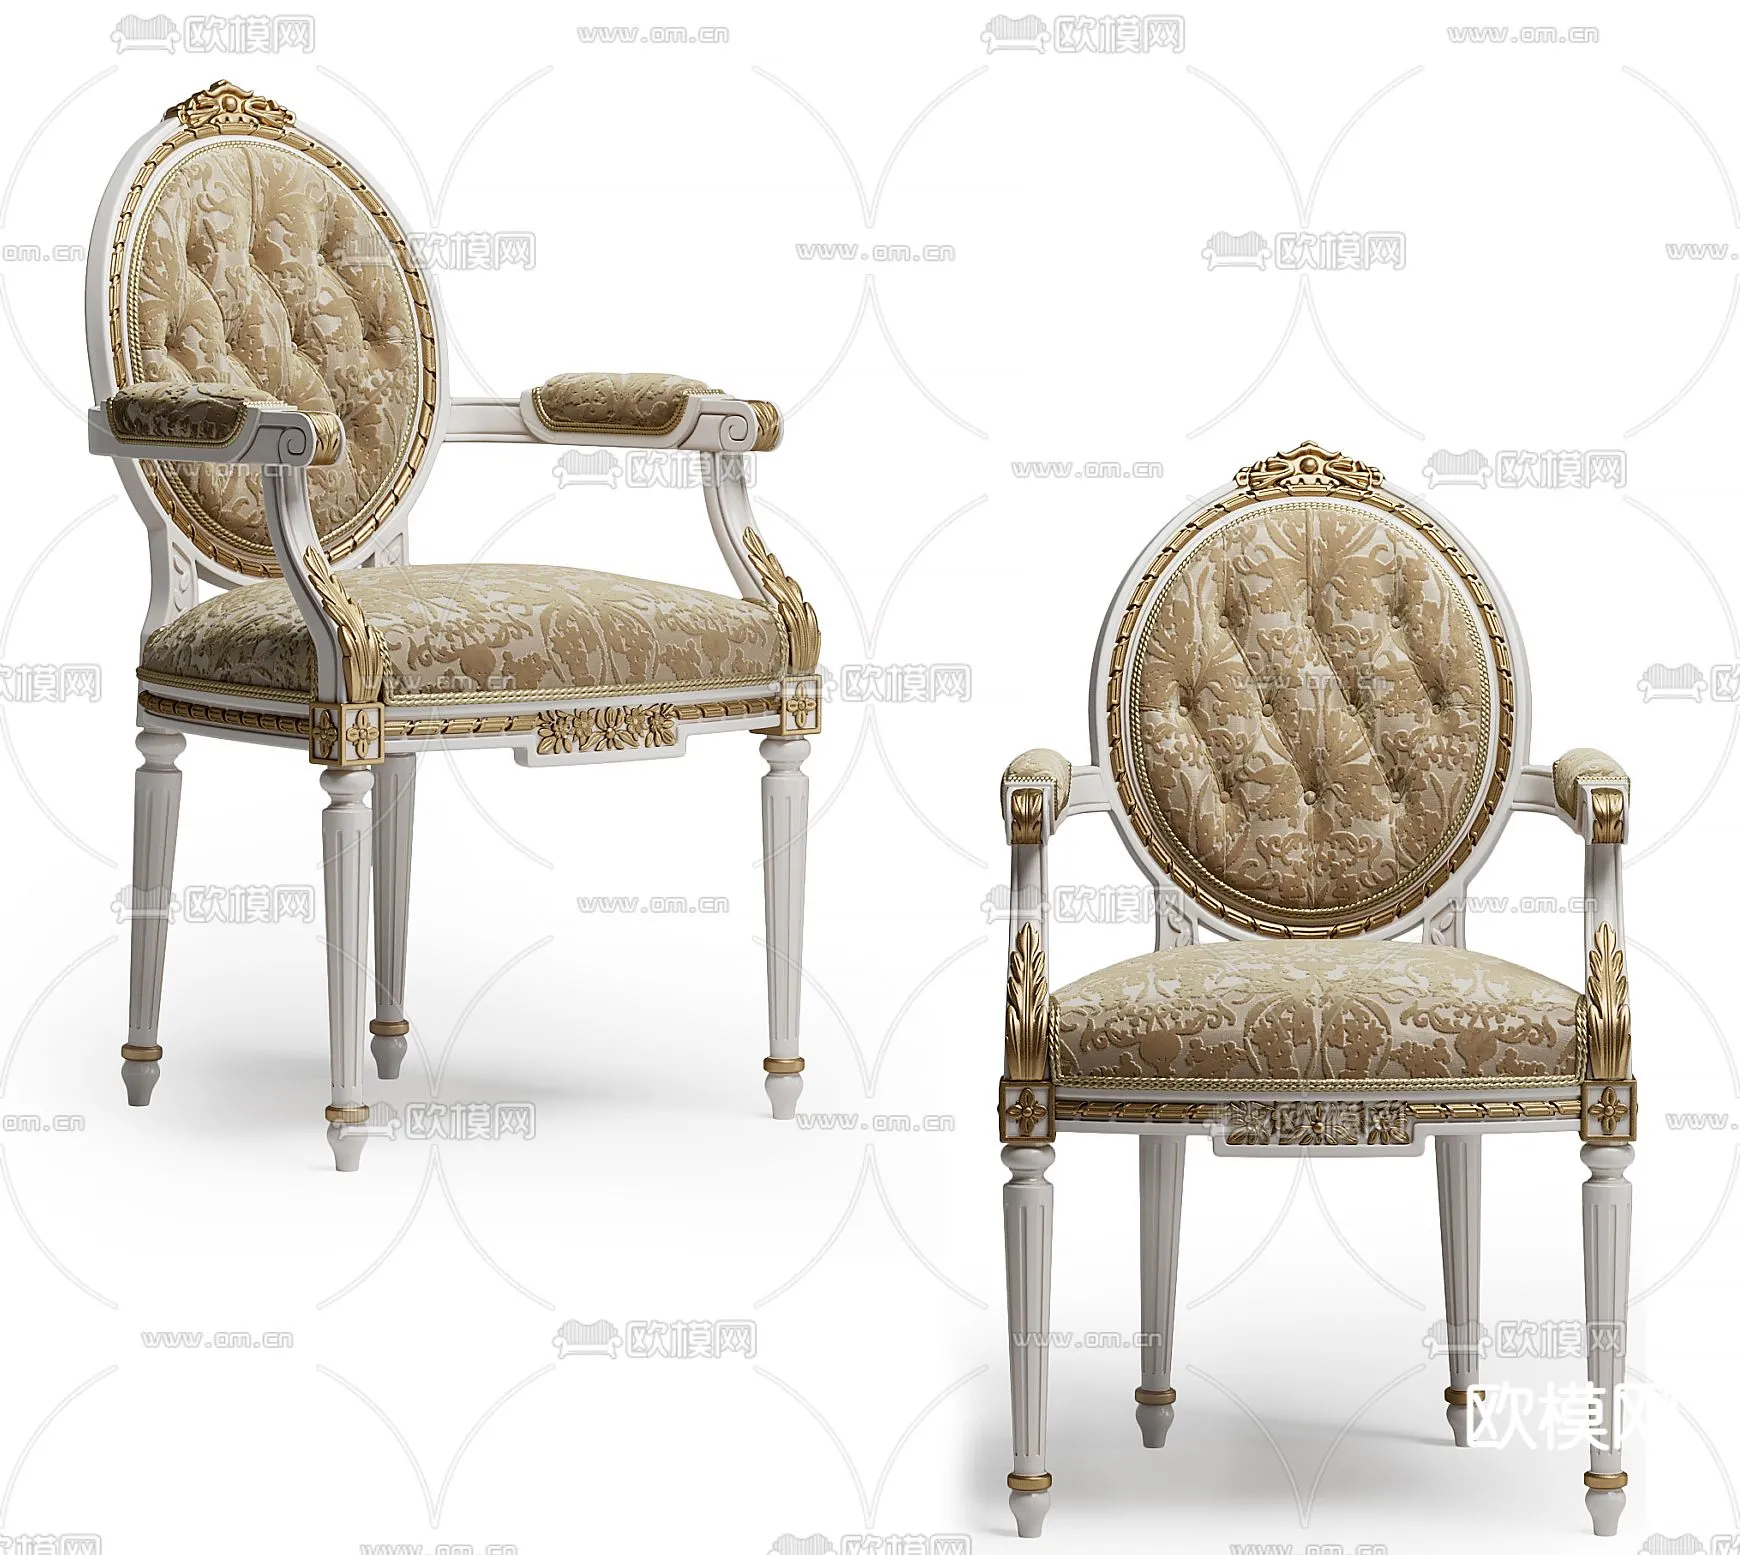 CLASSIC – DINING CHAIR 3DMODELS – 036